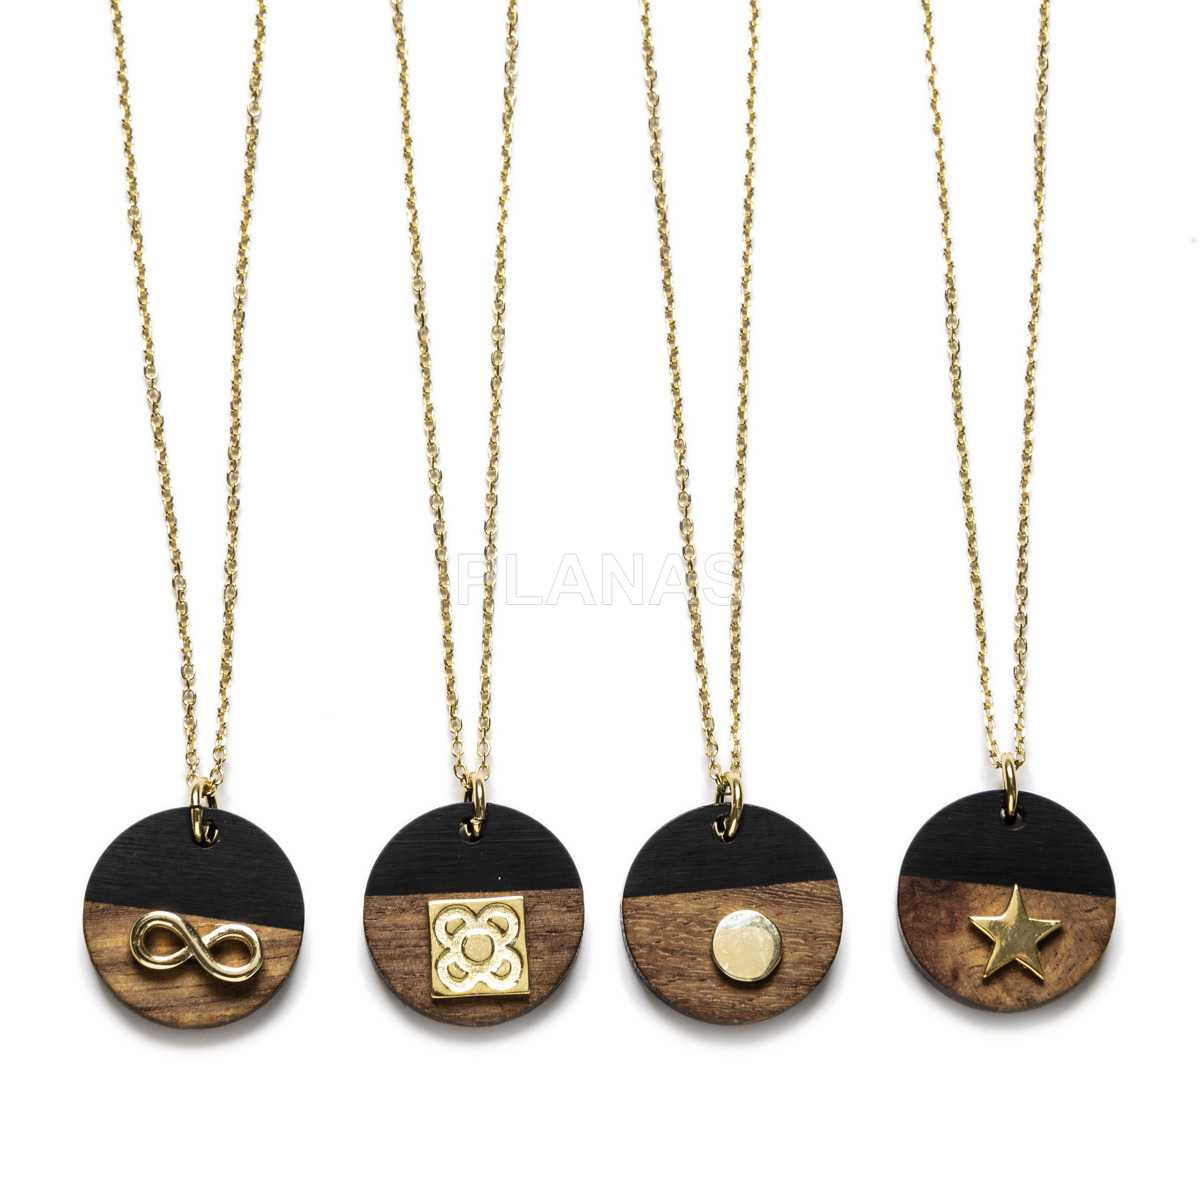 Necklace in sterling silver and gold plated with a wood and resin motif.